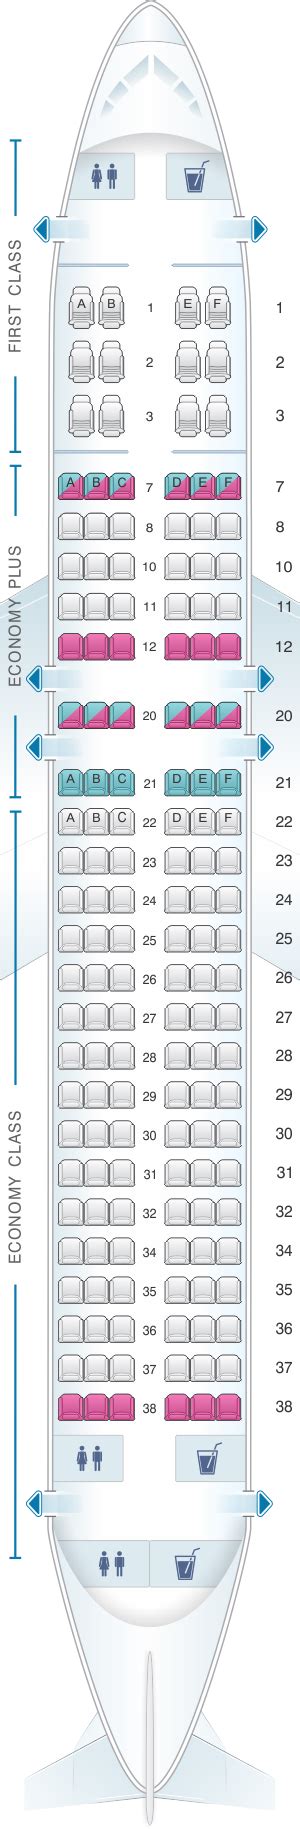 United Boeing 777 Seat Maps United. United operates the following models of Boeing, 777-200, 777-200ER, 777-300ER. As of 2022, the company has 19 777-200, 55 777-200ER, 22 777-300ER in its fleet. The aircraft was chosen by the airline due to its state-of-the-art technology. In addition, Boeing 777 was the first airplane that was 100% designed .... 